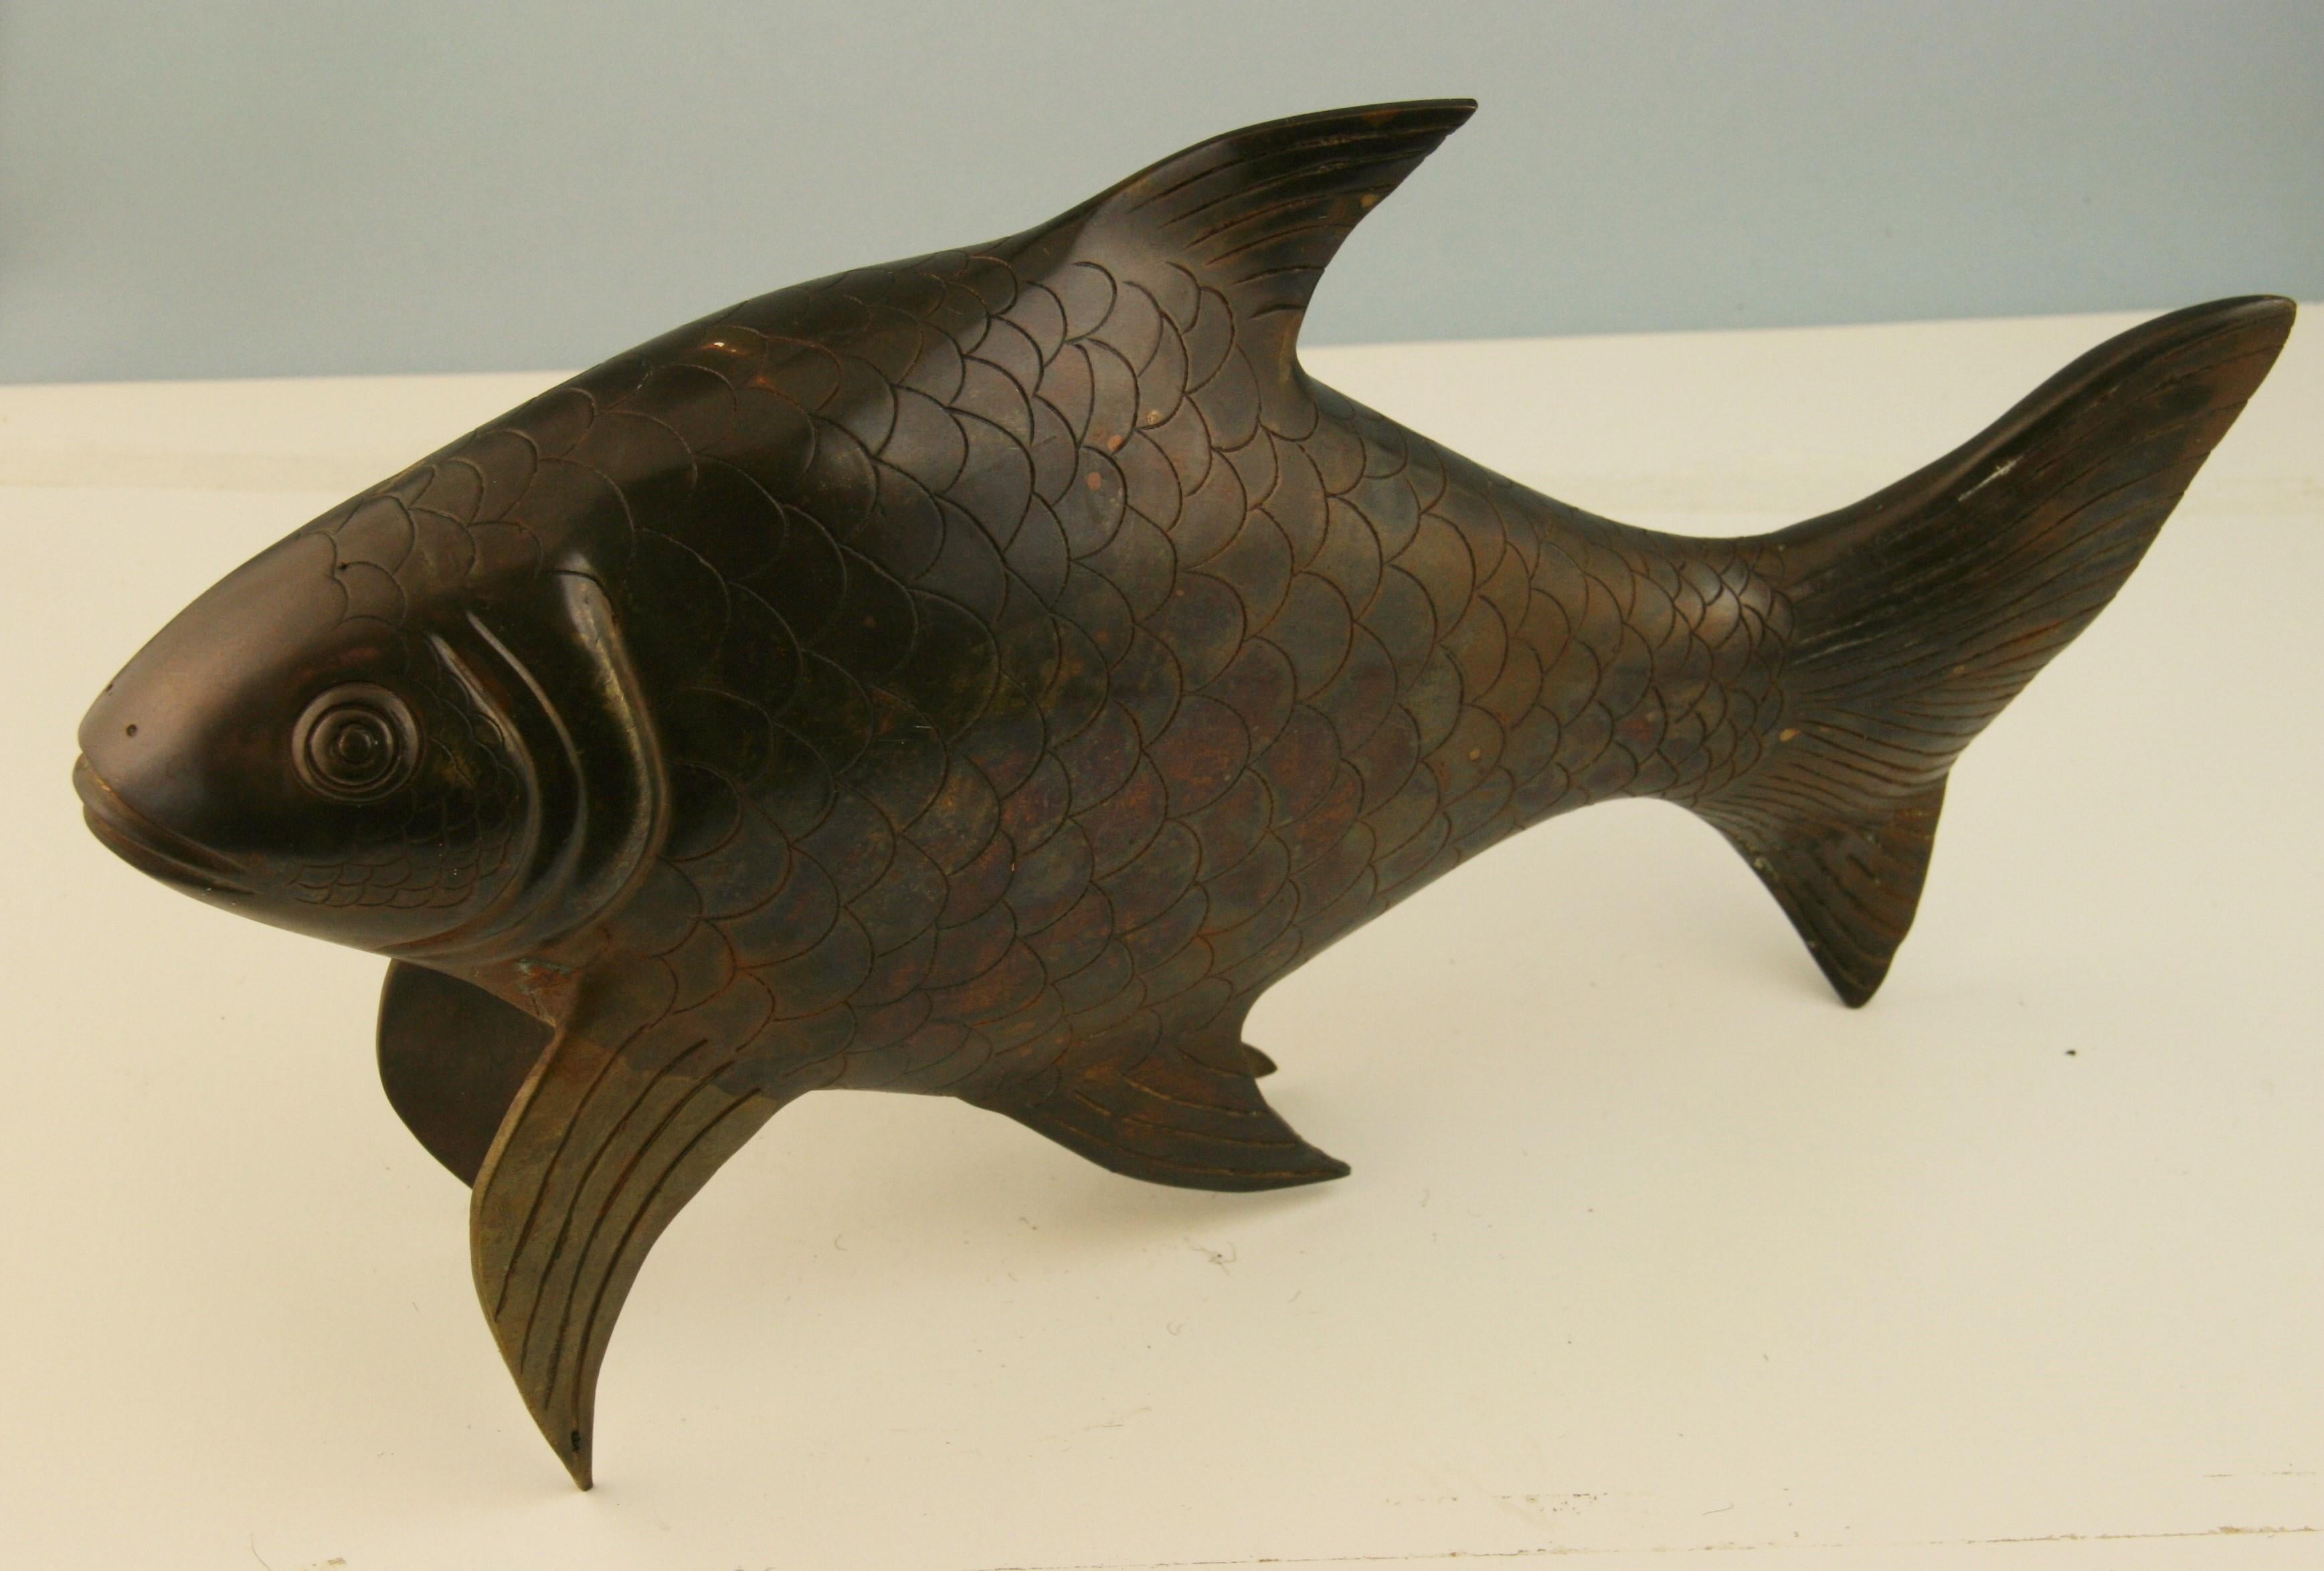 Japanese large scale hand cast bronze Koi fish with fine detail.
The Koi is symbolic of prosperity, perseverance and good fortune